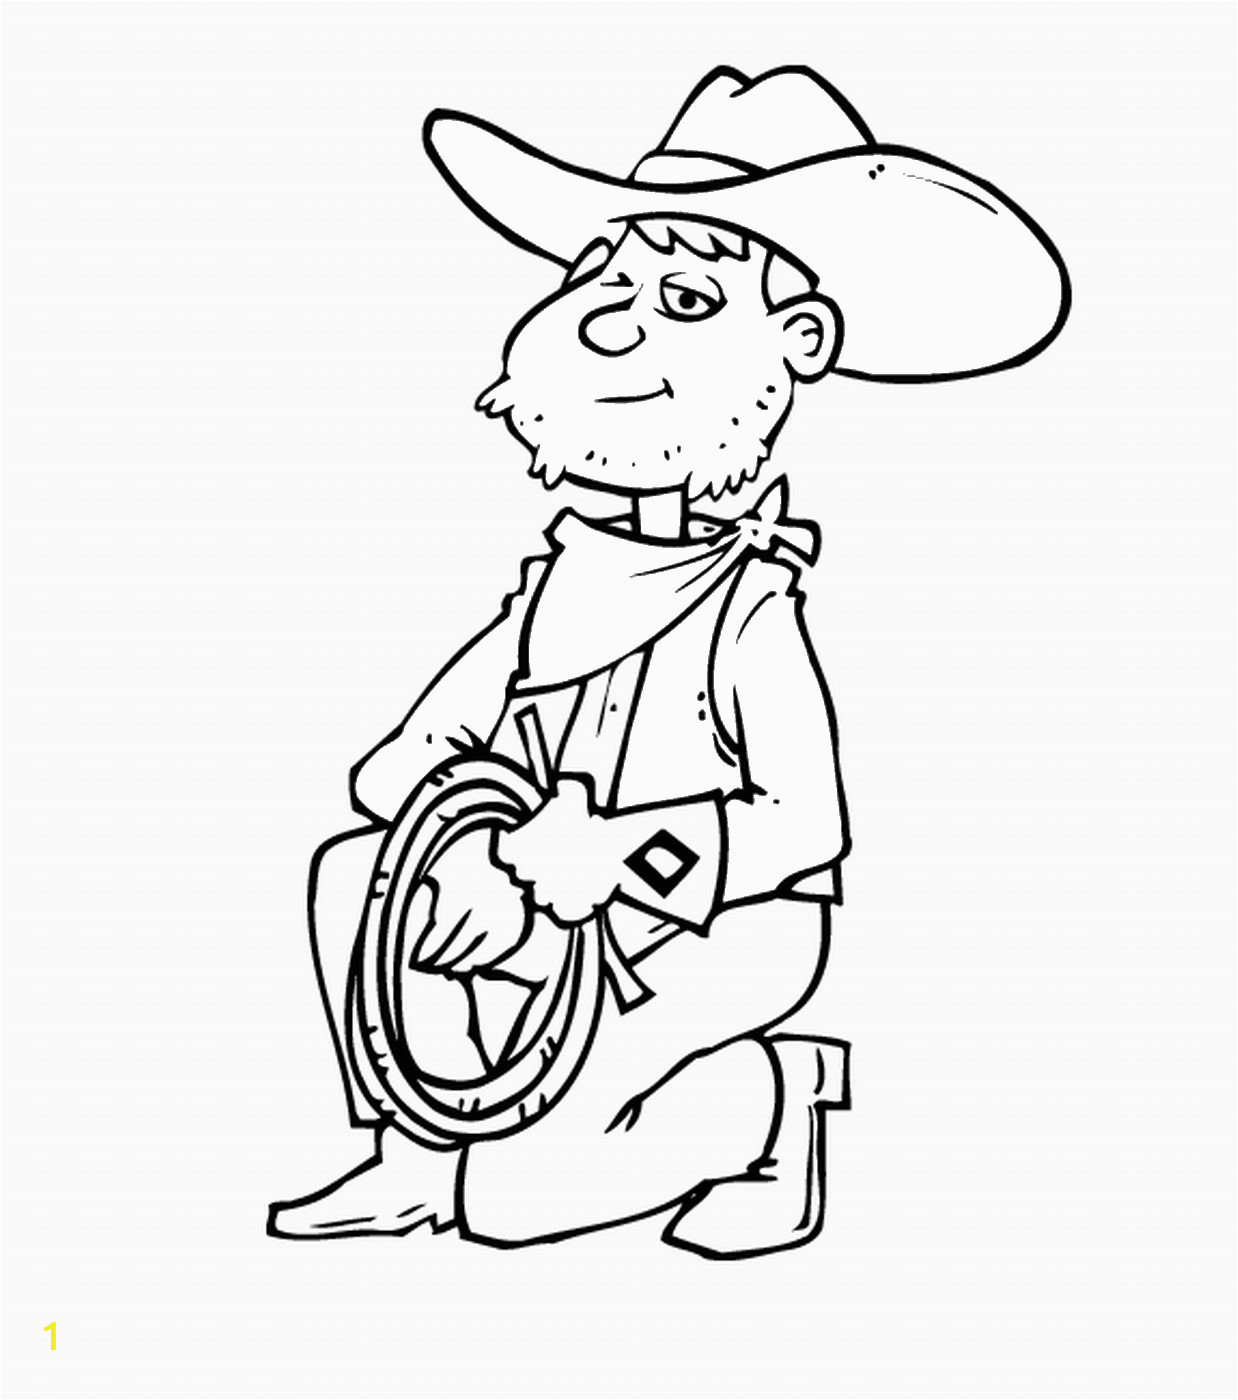 Cowboy Coloring Pages to Print Free Cowboy Coloring Pages